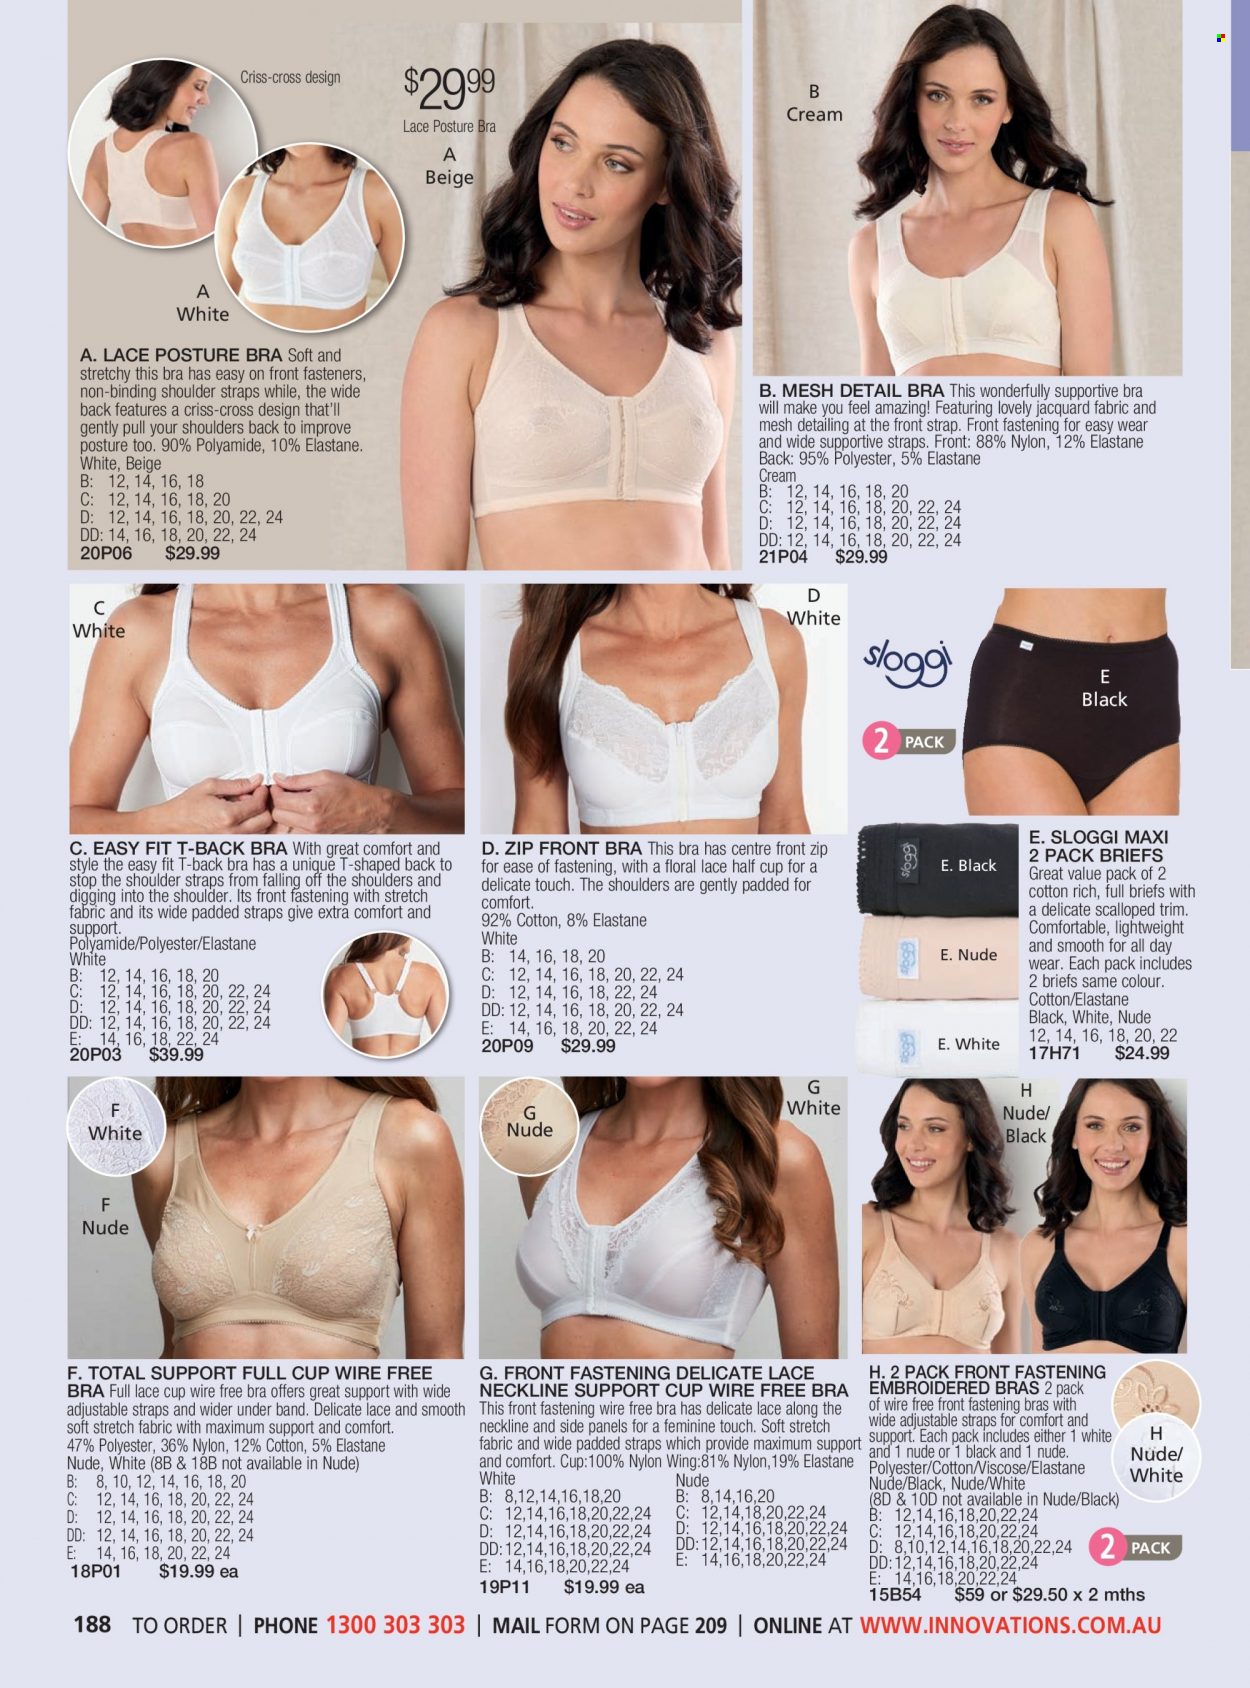 thumbnail - Innovations Catalogue - Sales products - cup, bra, briefs. Page 188.